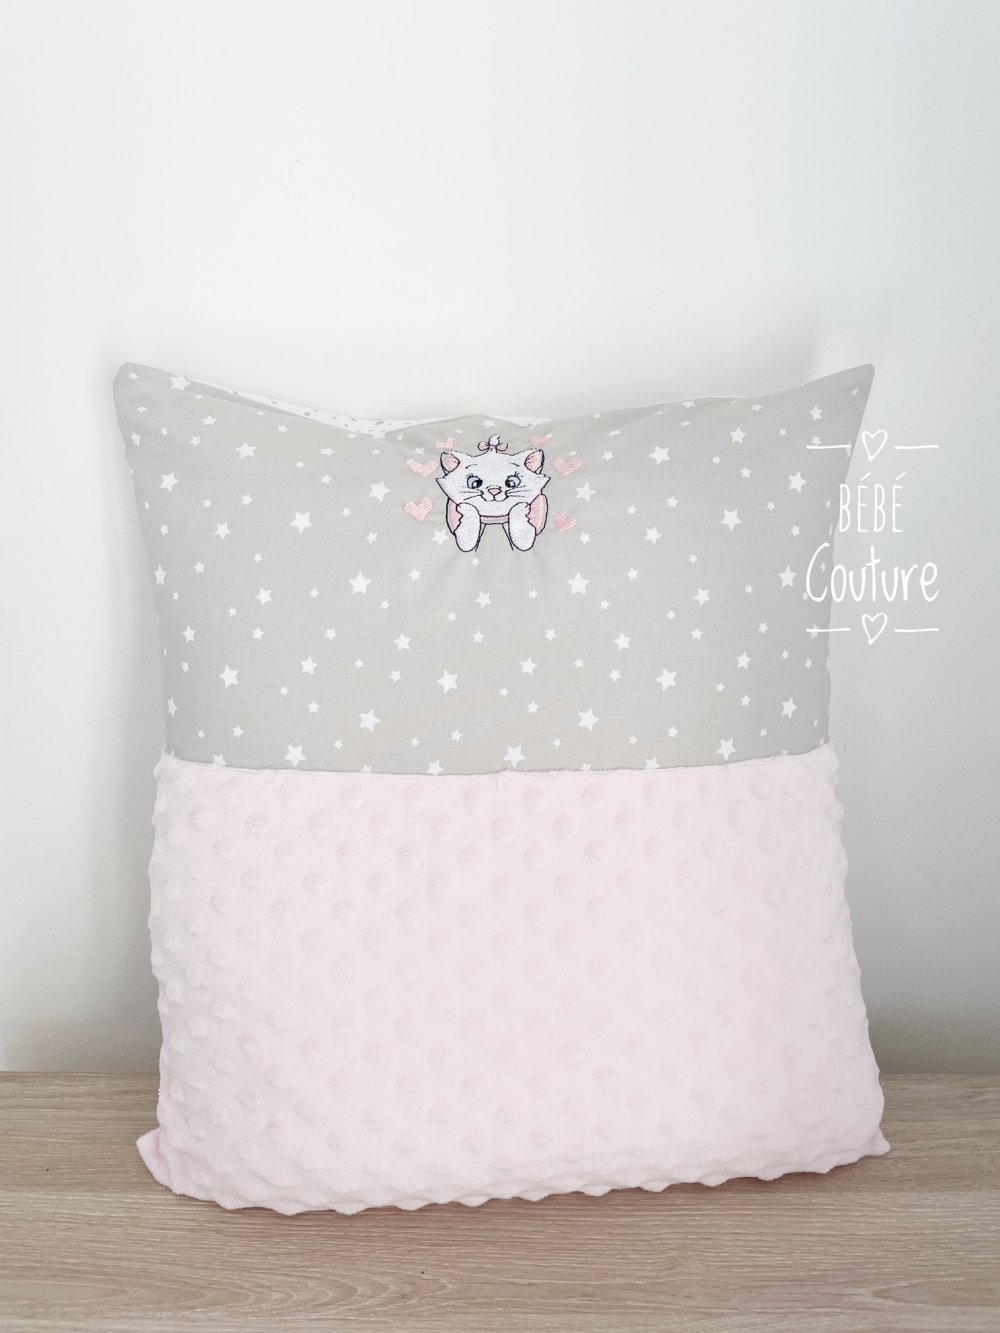 Coussin Marie Aristochats V1